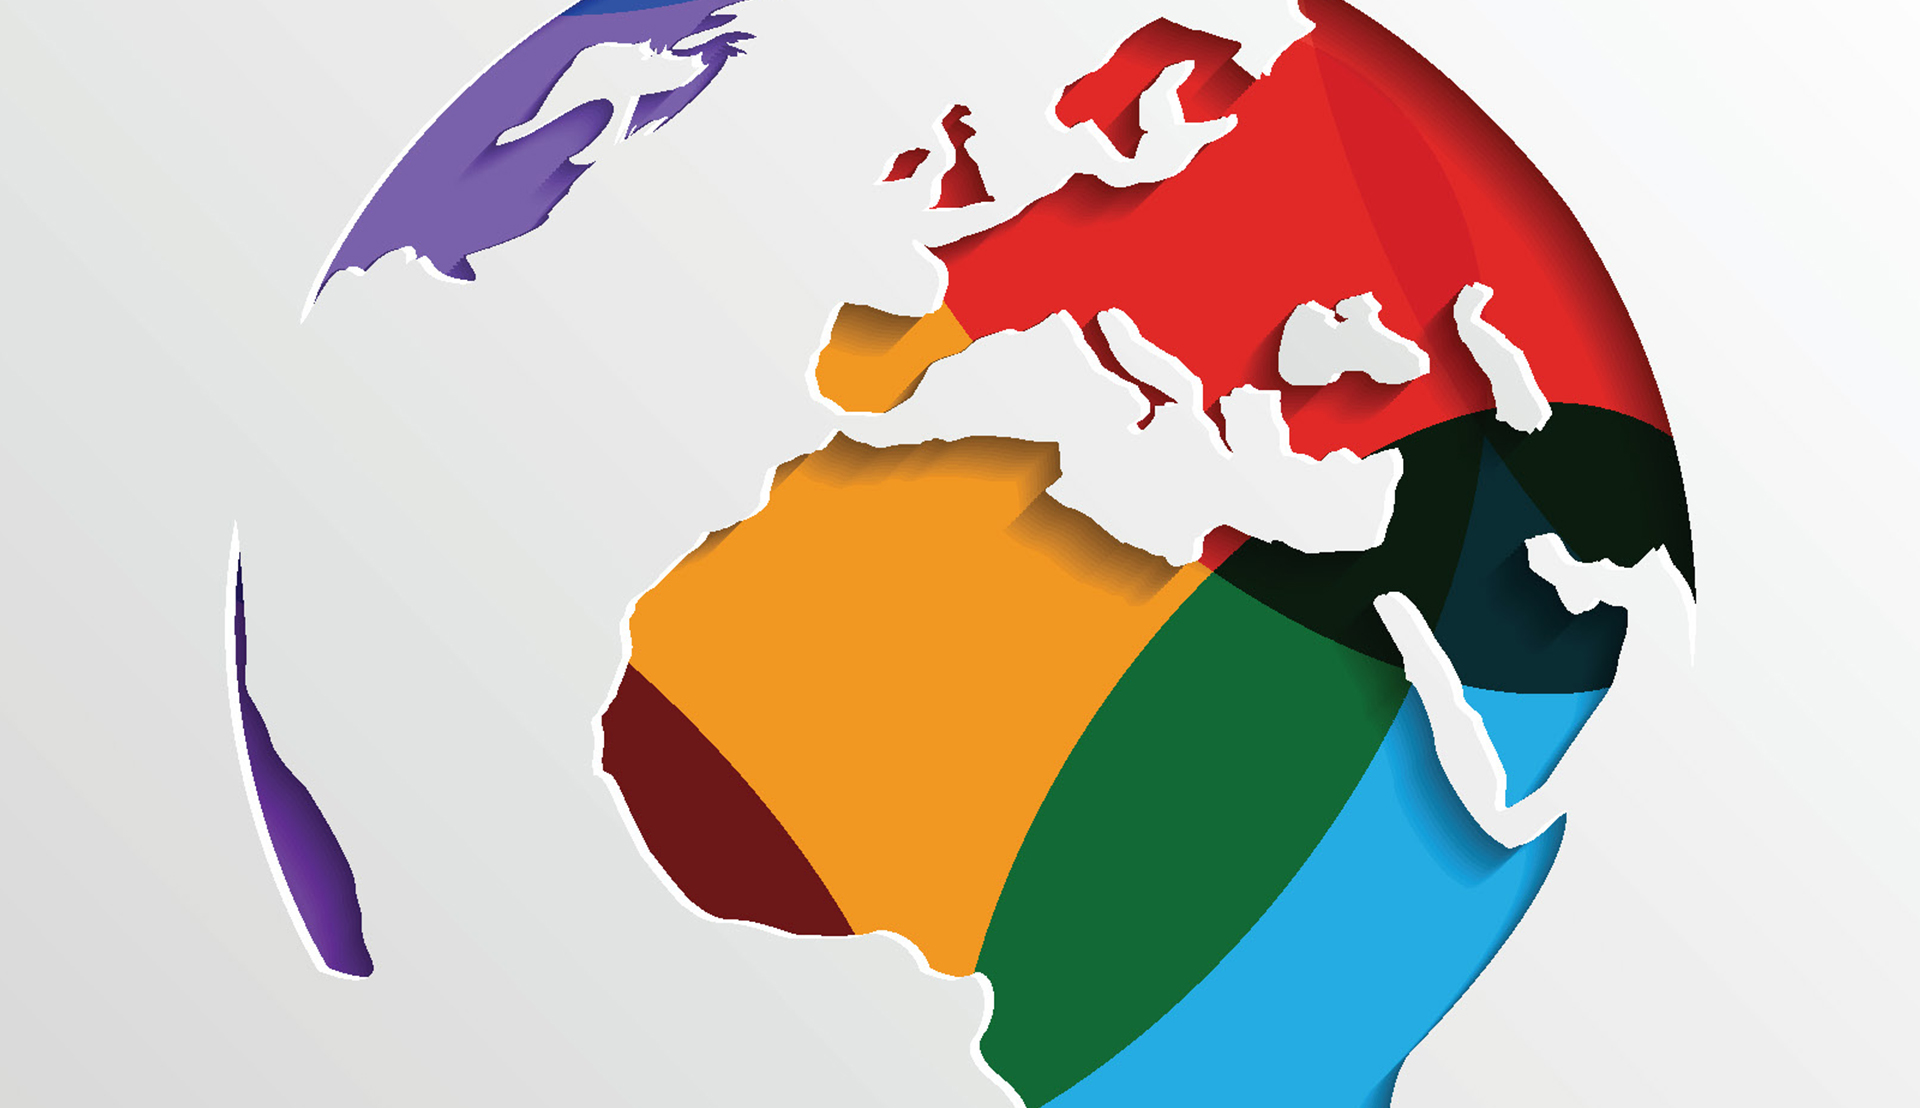 Rutgers Global - Rutgers Global Expo, September 26, 2018, graphic world map with rainbow colors underneath 